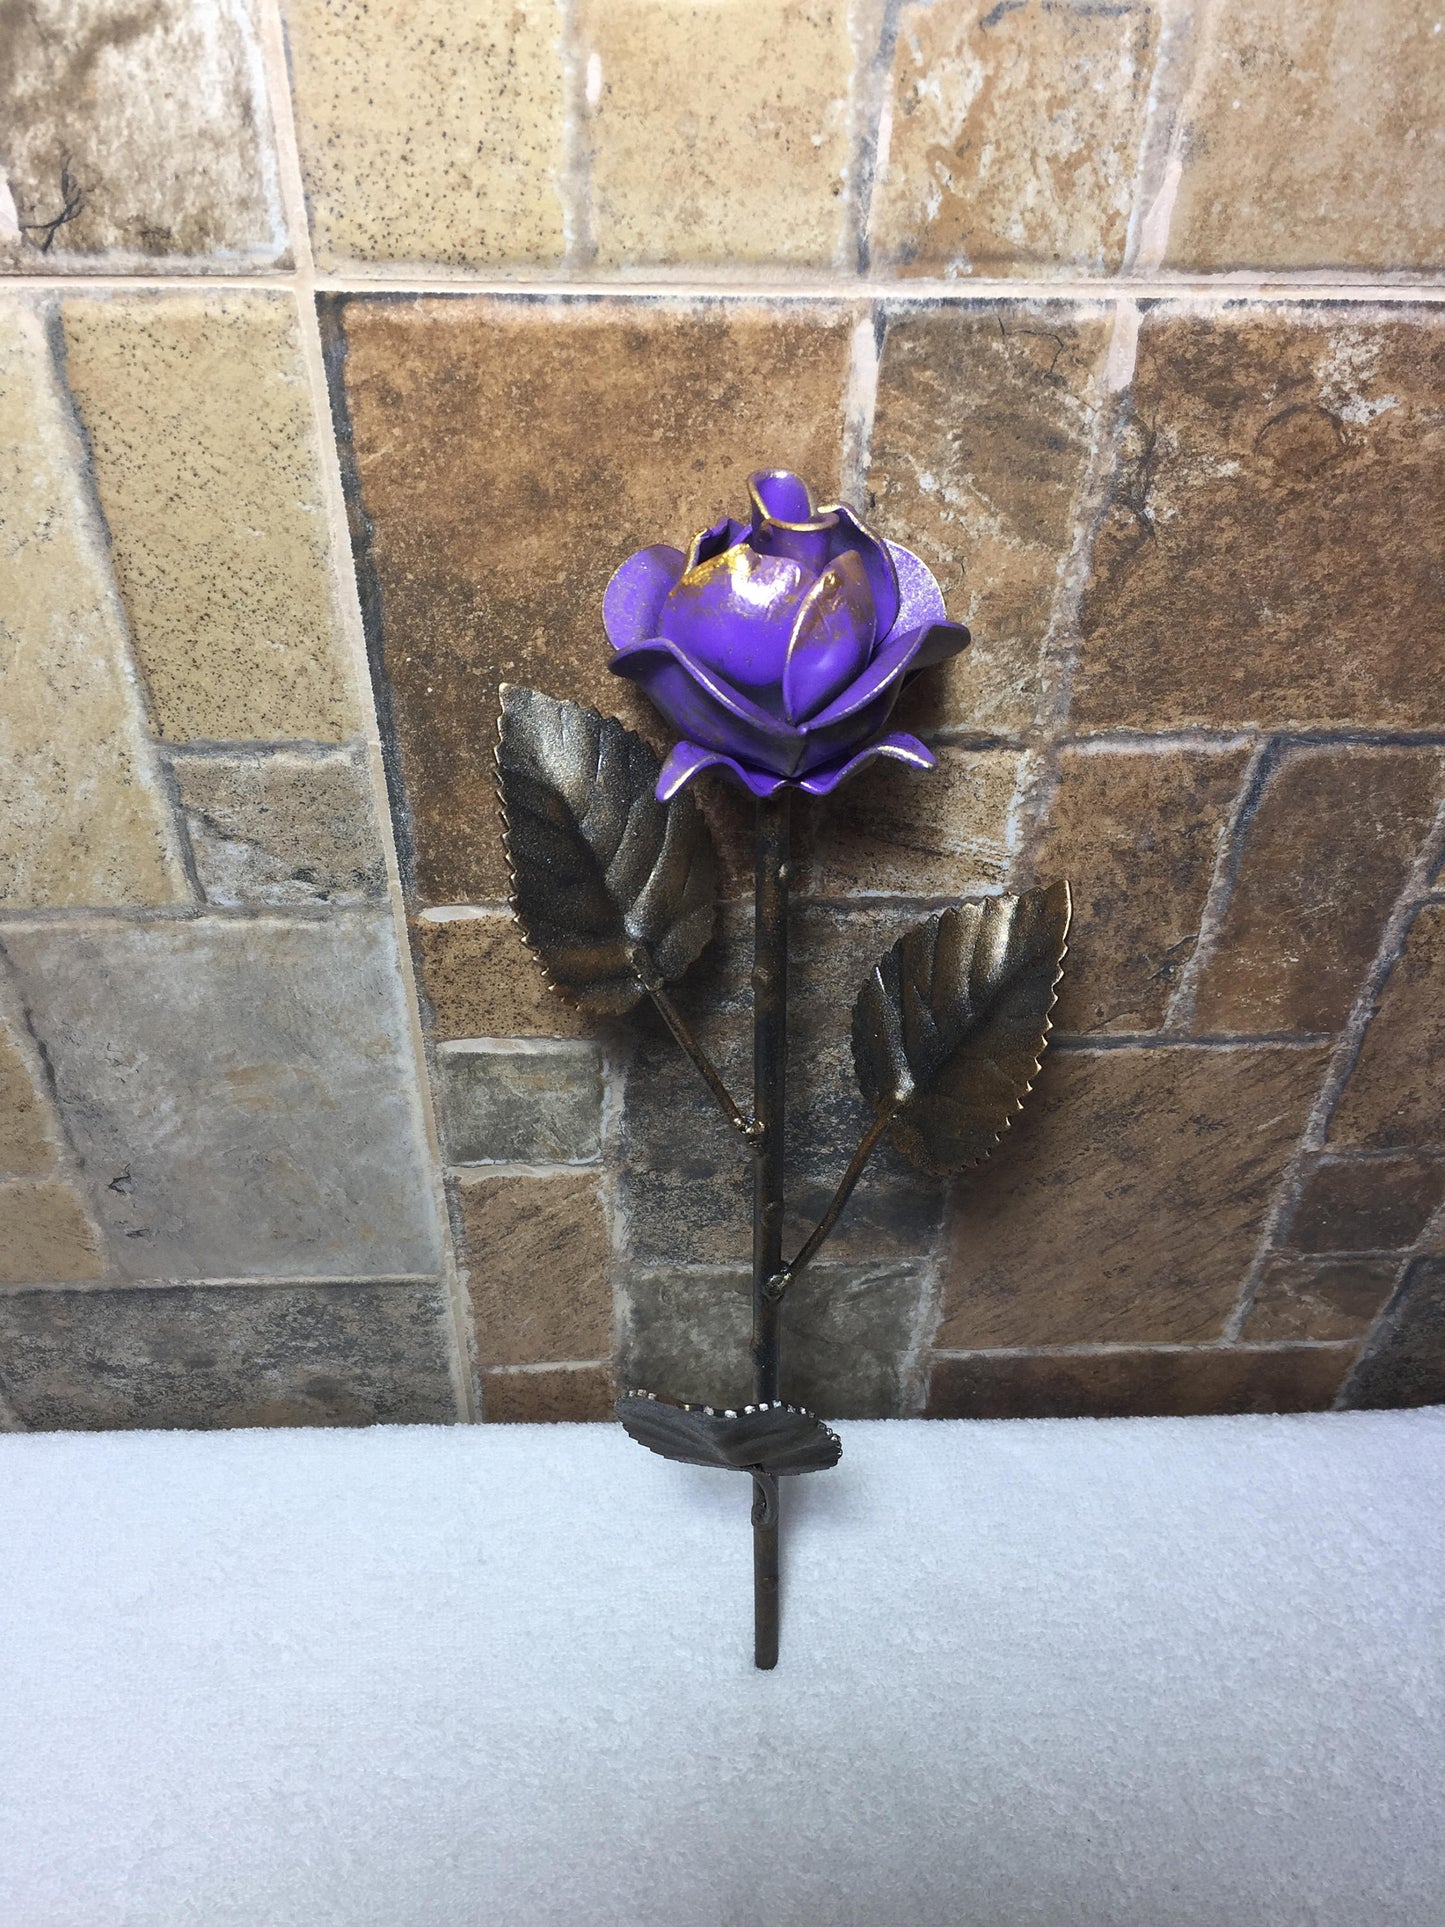 Metal rose, 6th anniversary gift, iron anniversary, hand forged rose, metal sculpture, iron rose, metal roses, forged rose, steampunk, roses